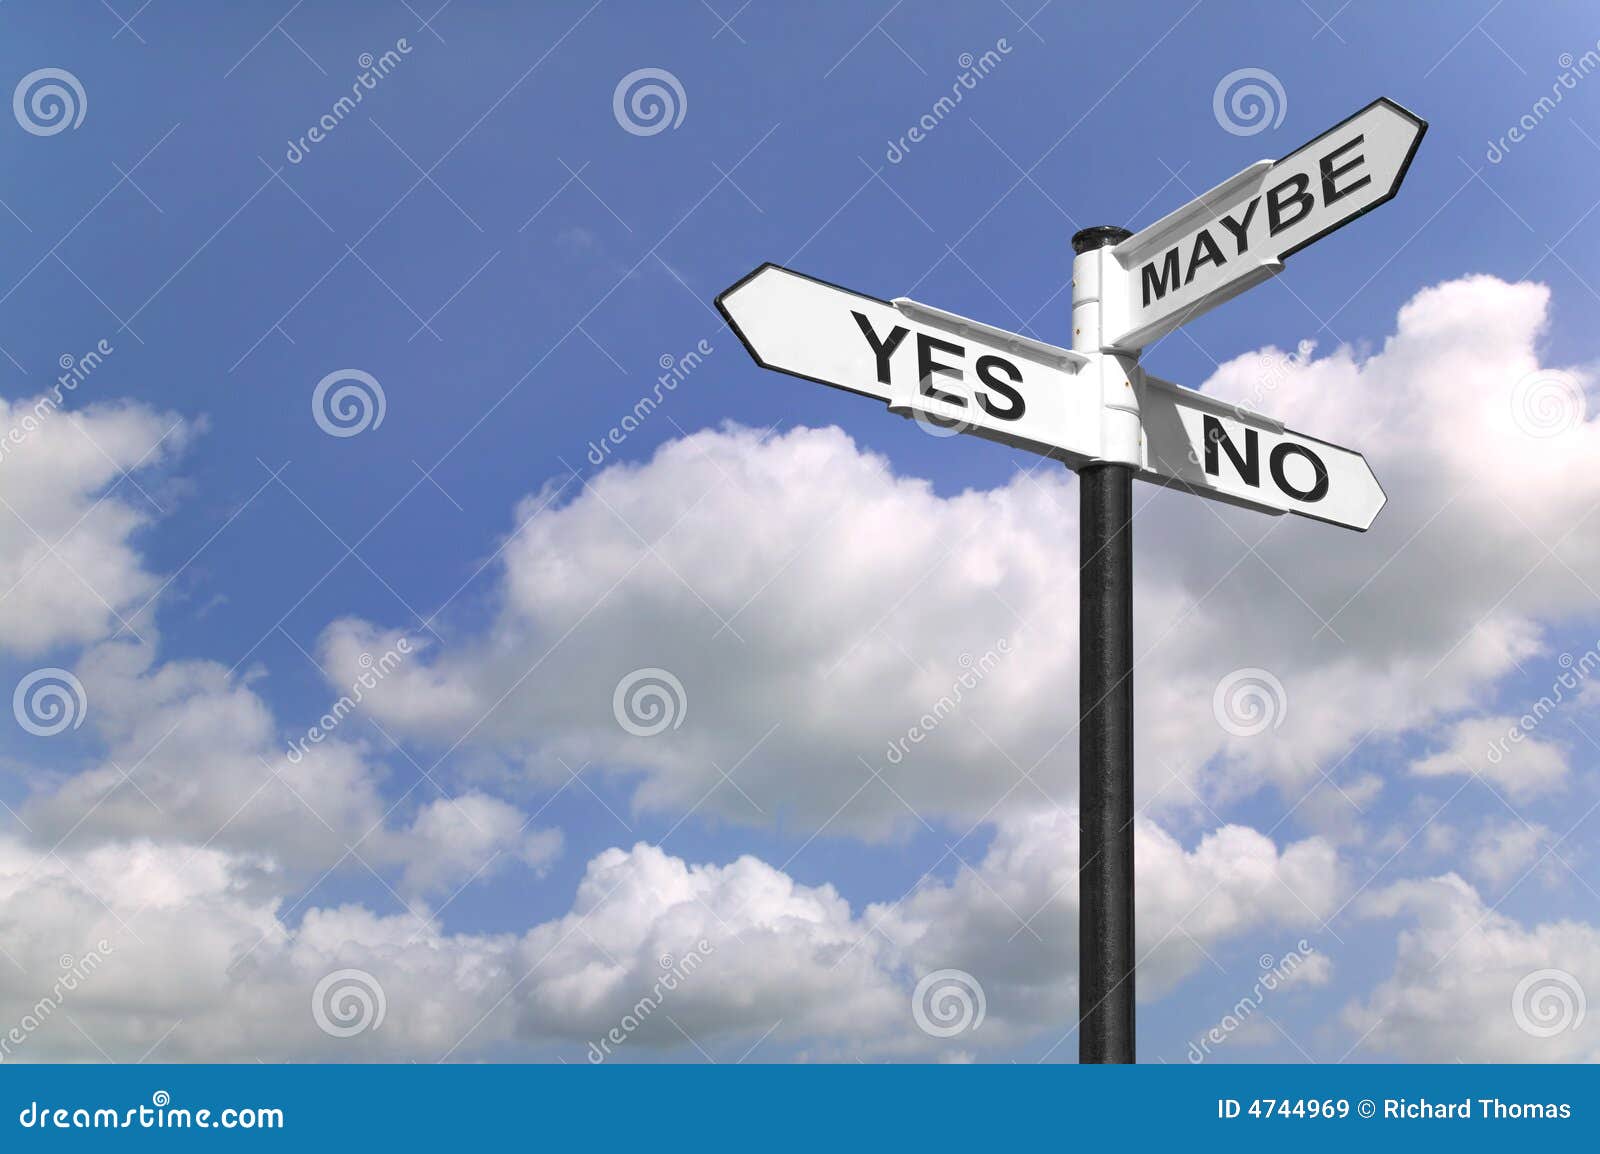 yes no maybe signpost